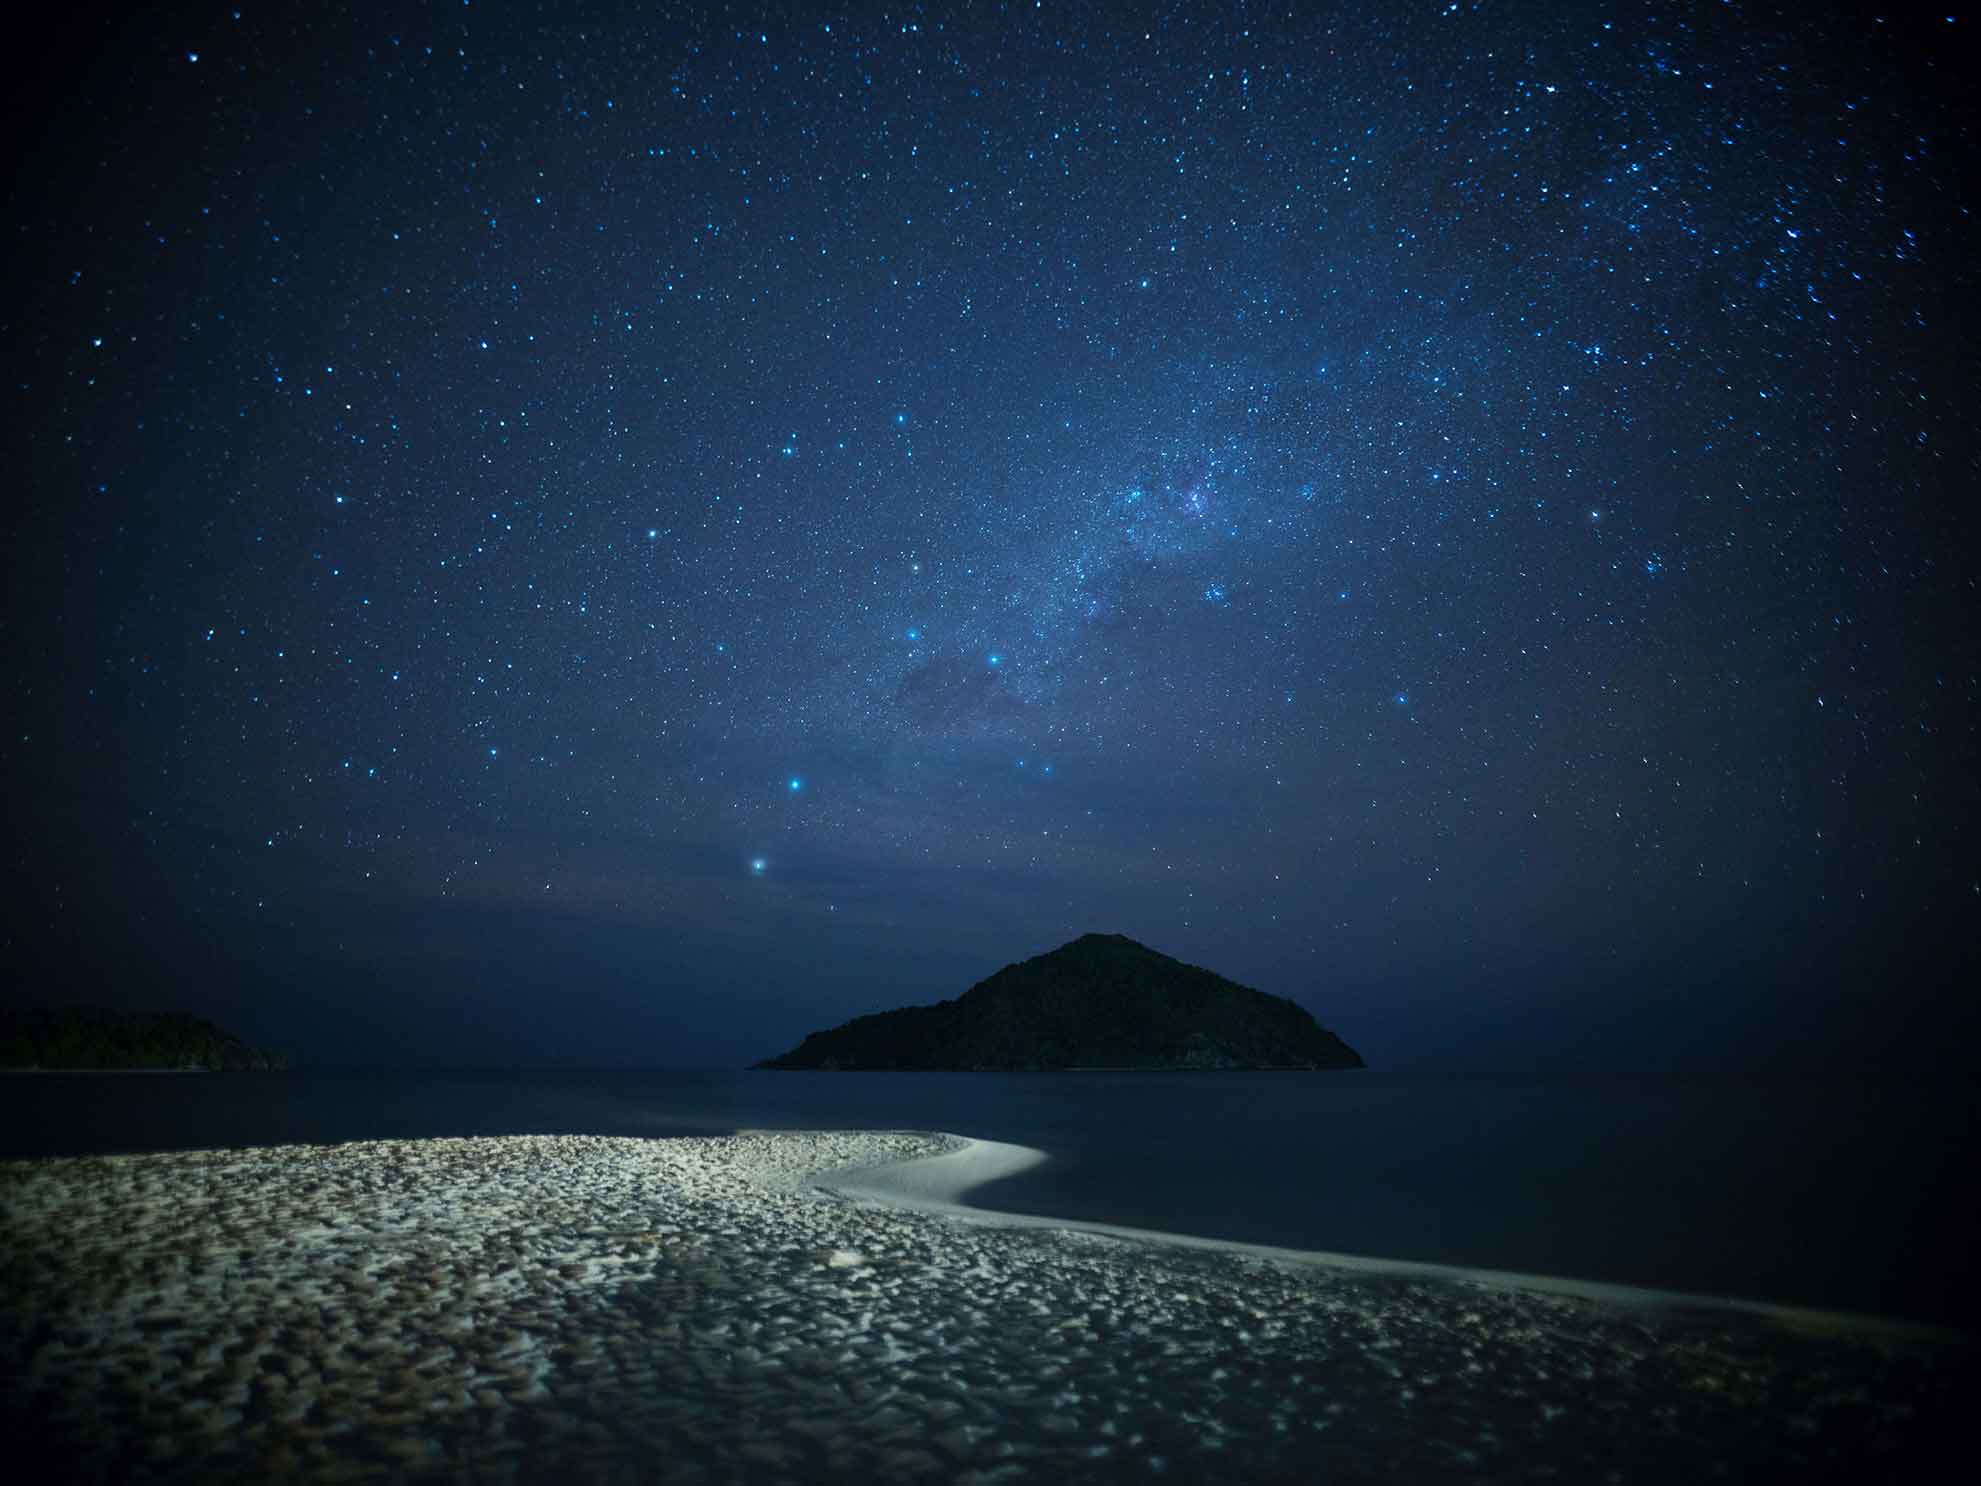 Beautiful starry night over private island, Stargazing at Bawah Reserve, Indonesia